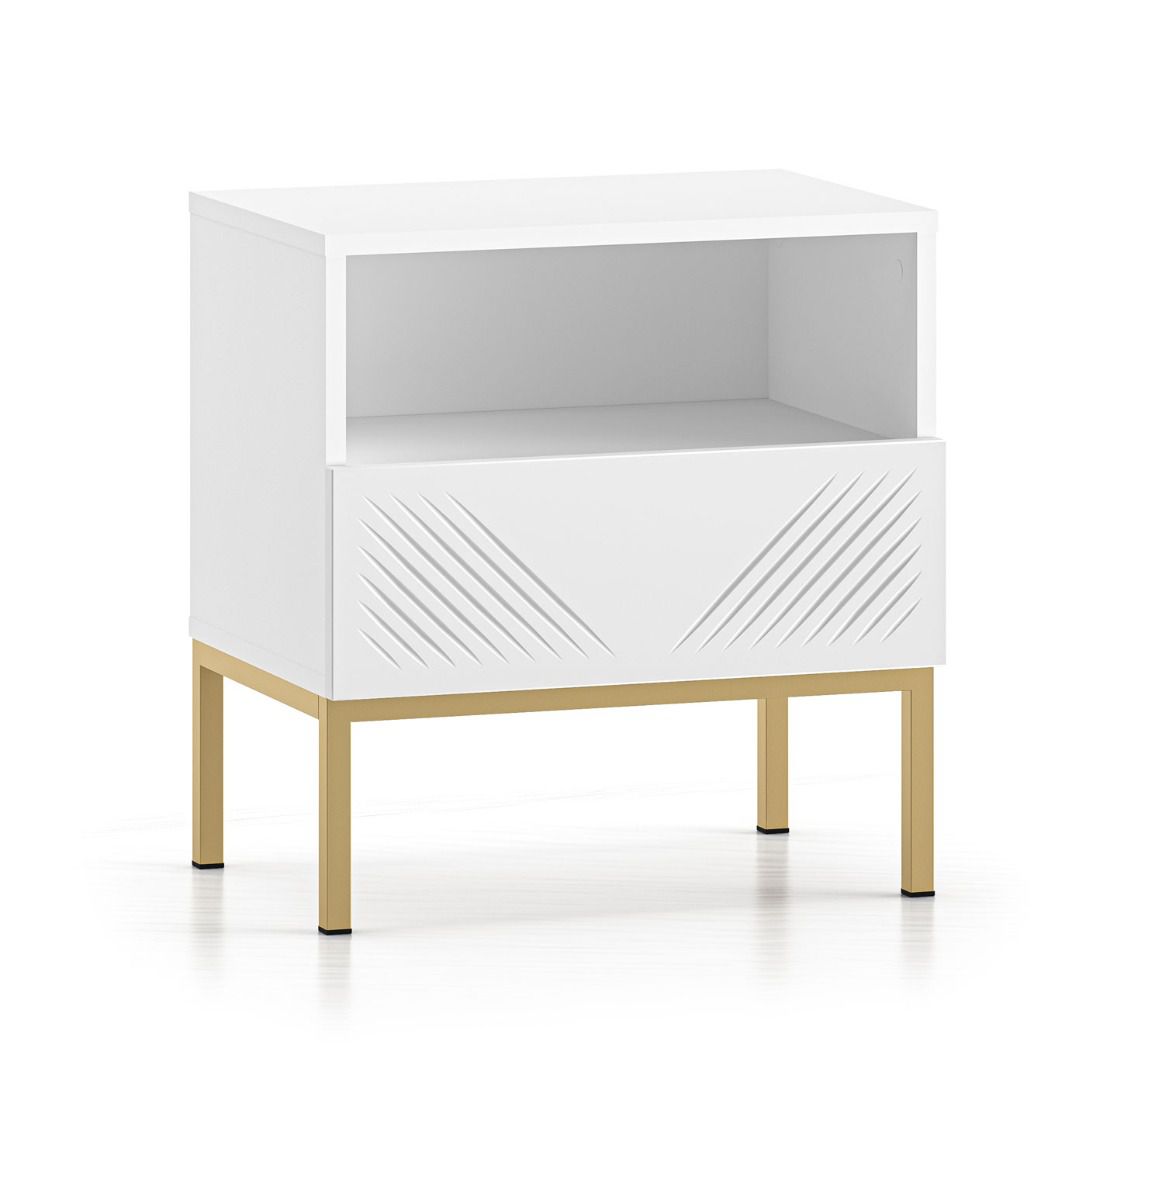 Simple bedside cabinet with one drawer Taos 20, color: white matt, soft-close system, dimensions: 53 x 50 x 34 cm, legs: gold, with one compartment, push-to-open function